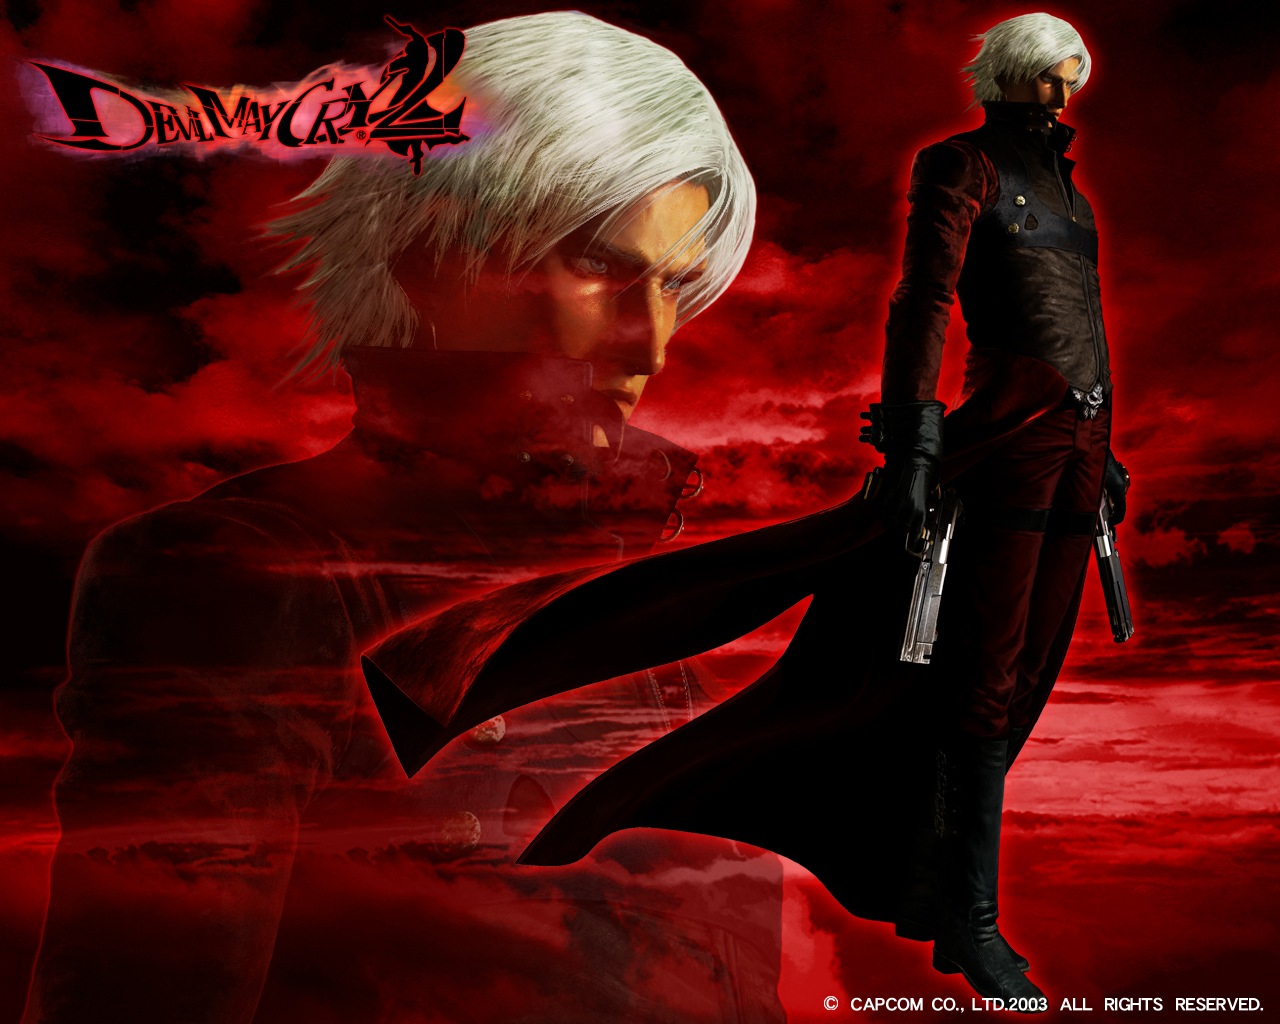 Devil+may+cry+3+dante+wallpapers